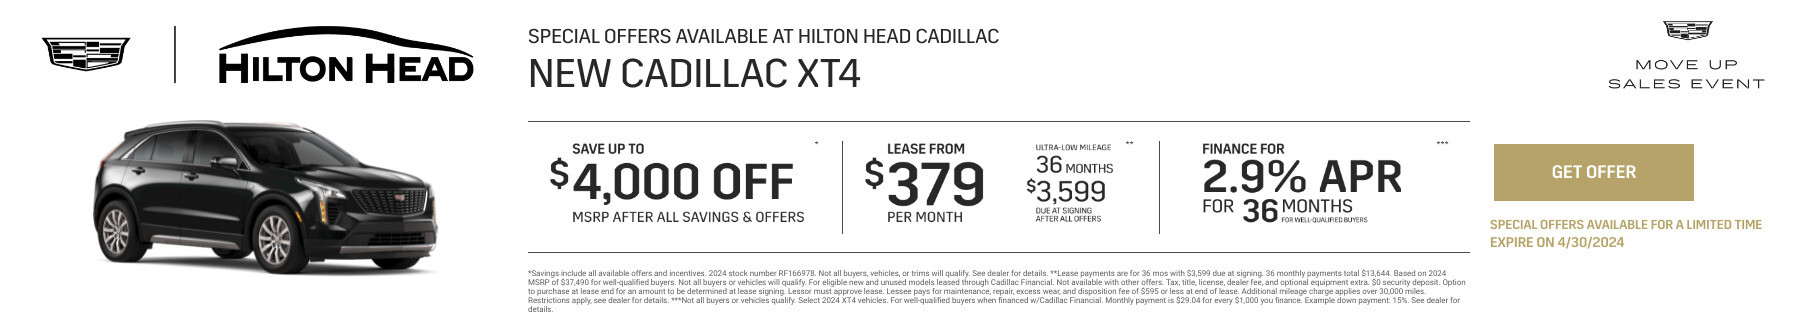 New Cadillac XT4 Current Deals and Offers in Savannah, GA